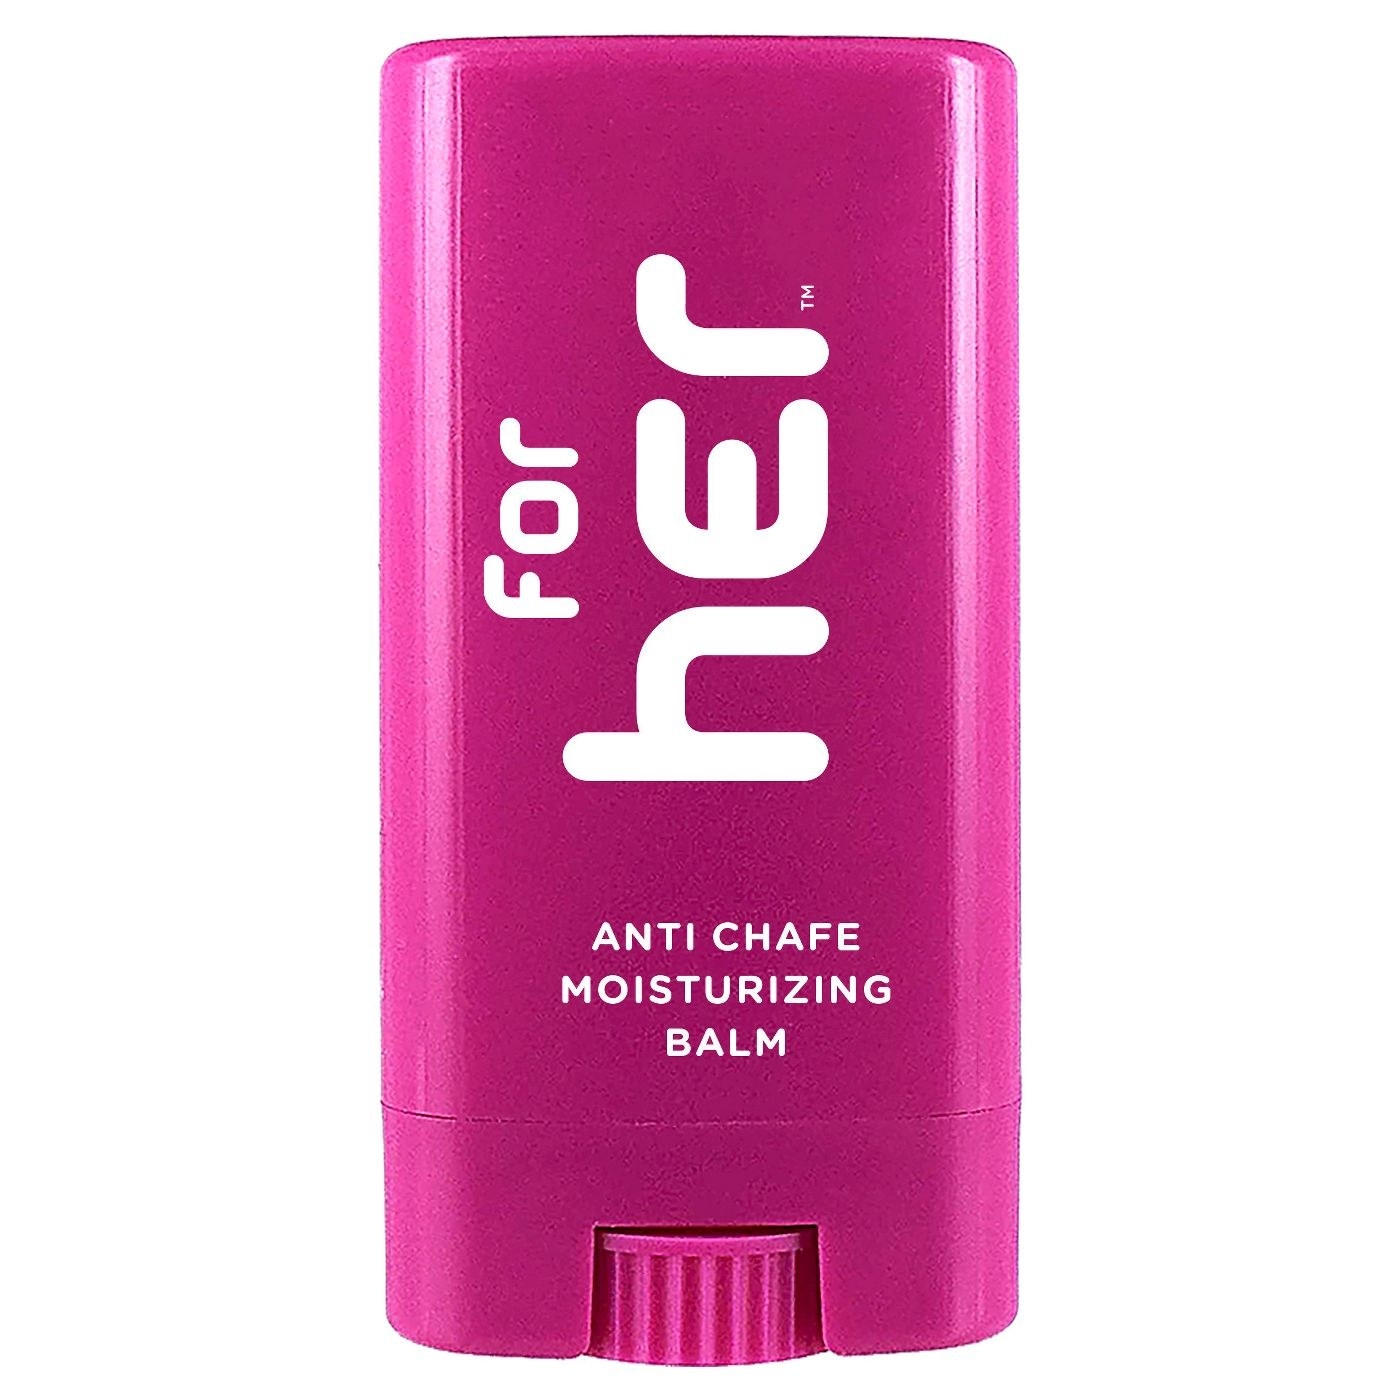 a stick of anti-chafe moisturizing balm in a pink bottle